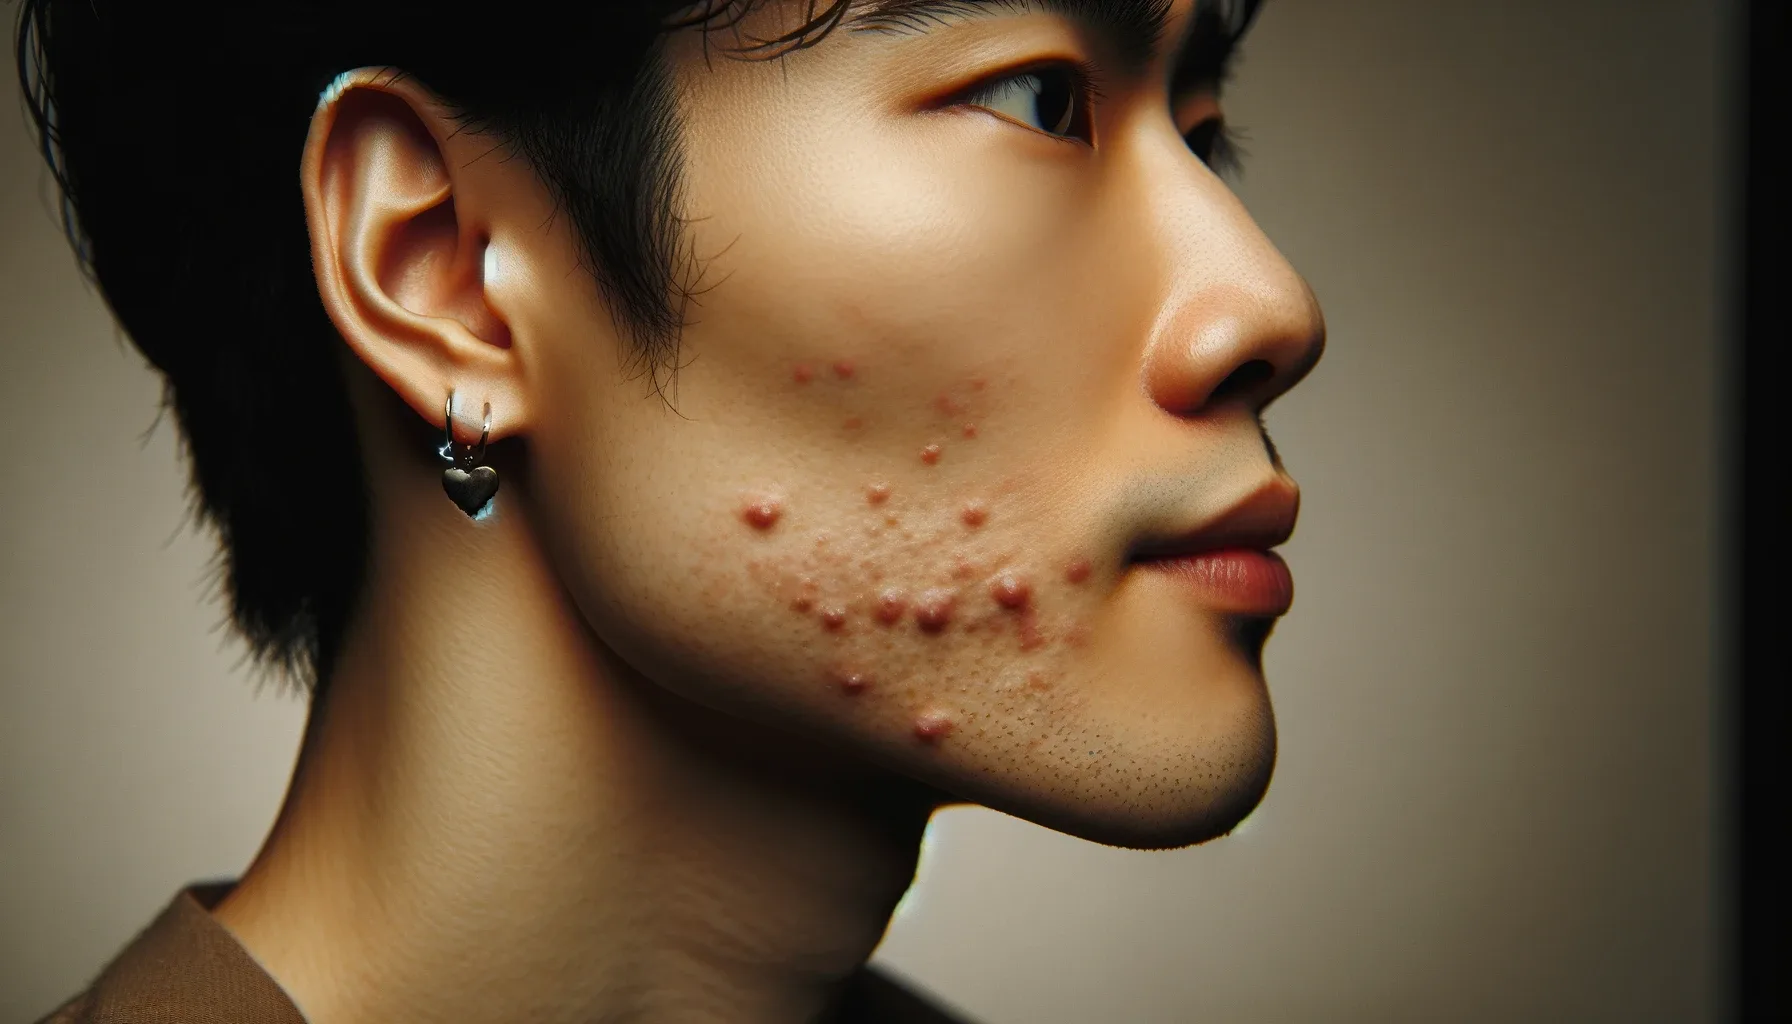 An image of a young Asian man with moderate acne on his jaw area.